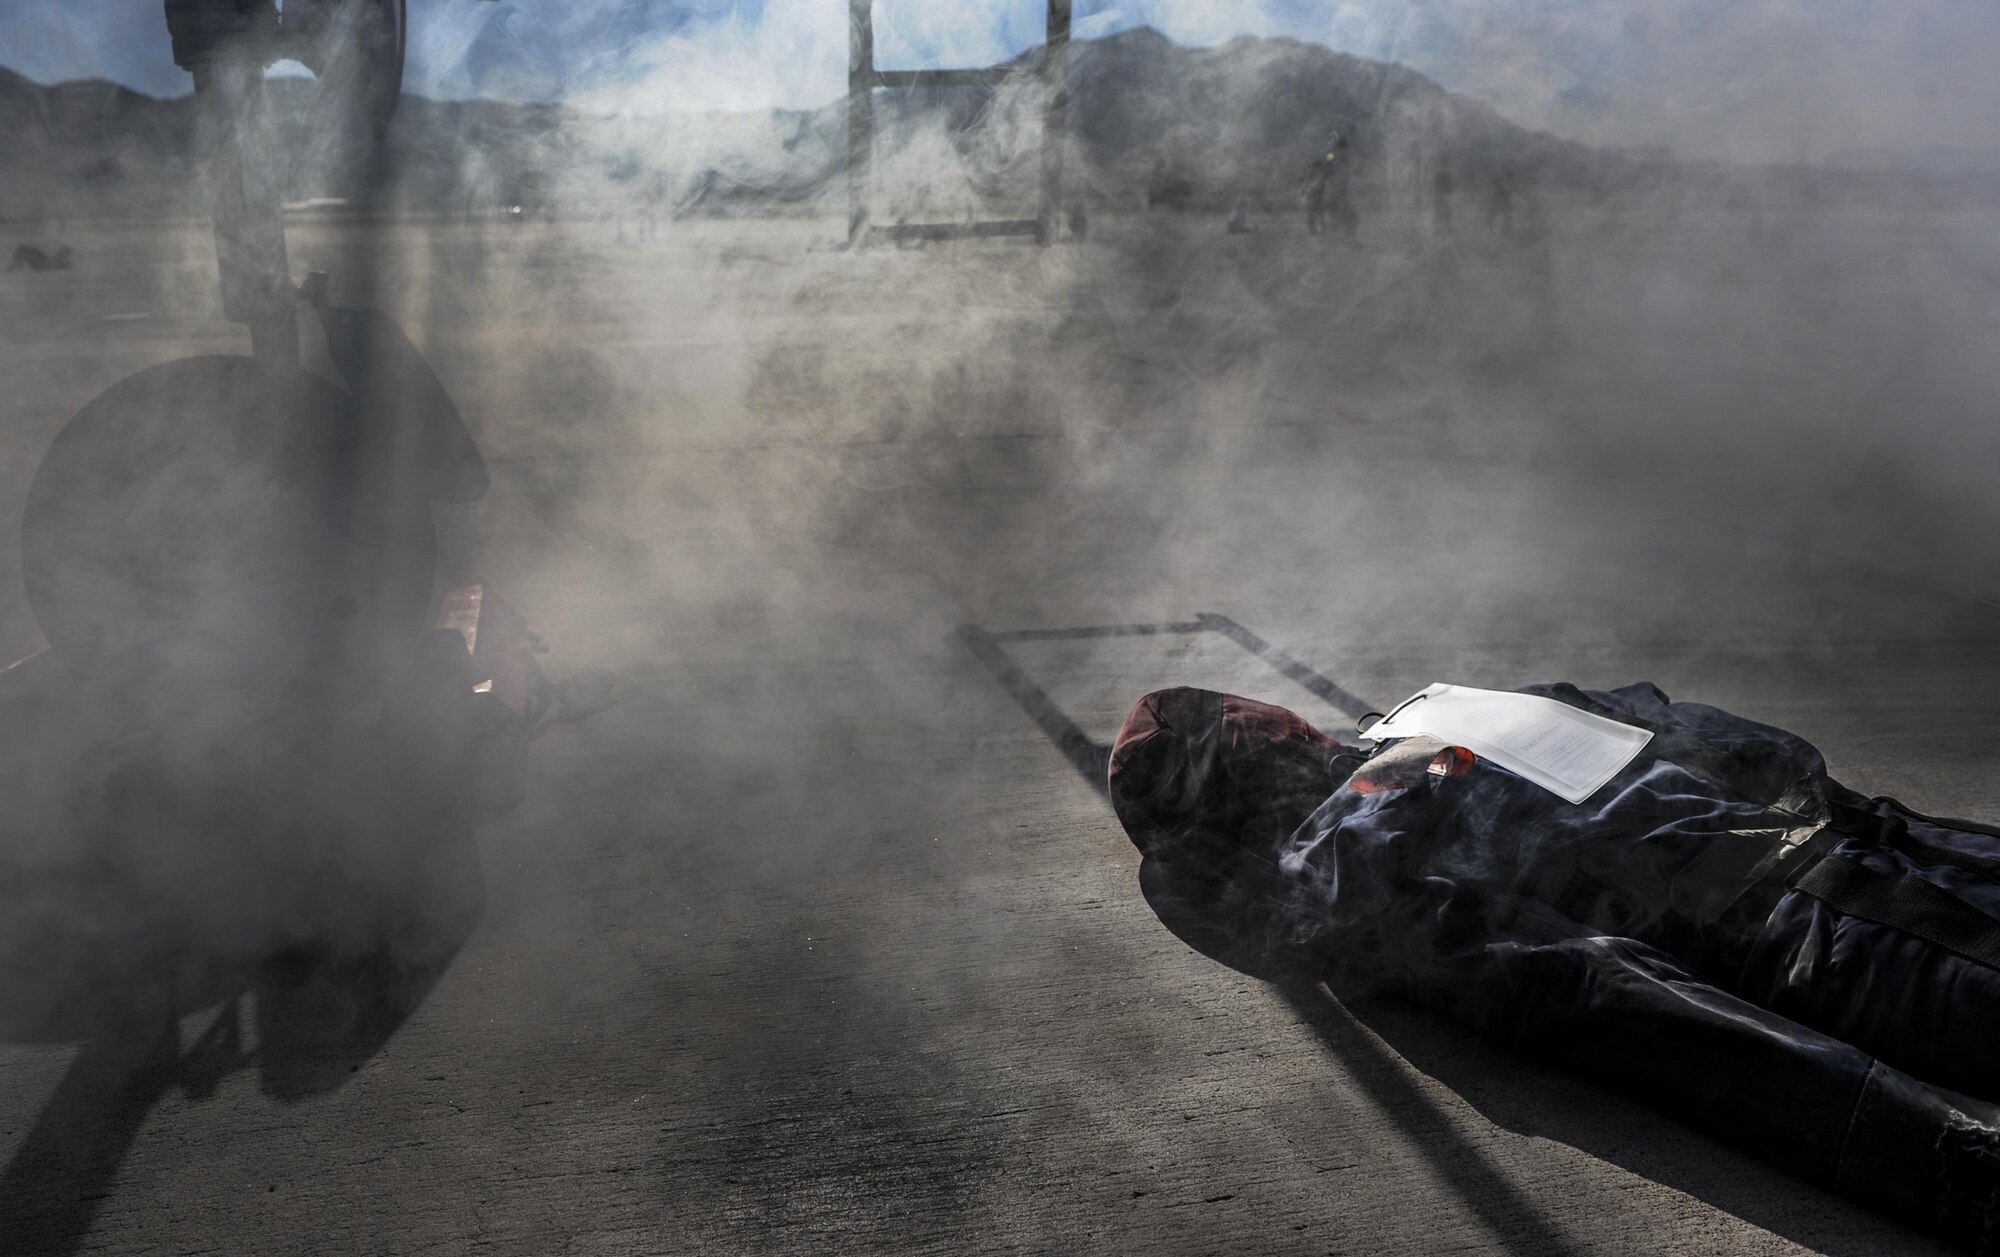 A simulated casualty lies underneath an F-15 Eagle during the Major Accident Recovery Exercise at Nellis Air Force Base, Nev., Oct. 13, 2016. Nellis AFB conducted the exercise to evaluate real-life response capabilities of emergency personnel for scenarios that could impact the base. (U.S. Air Force photo by Airman 1st Class Kevin Tanenbaum/Released)